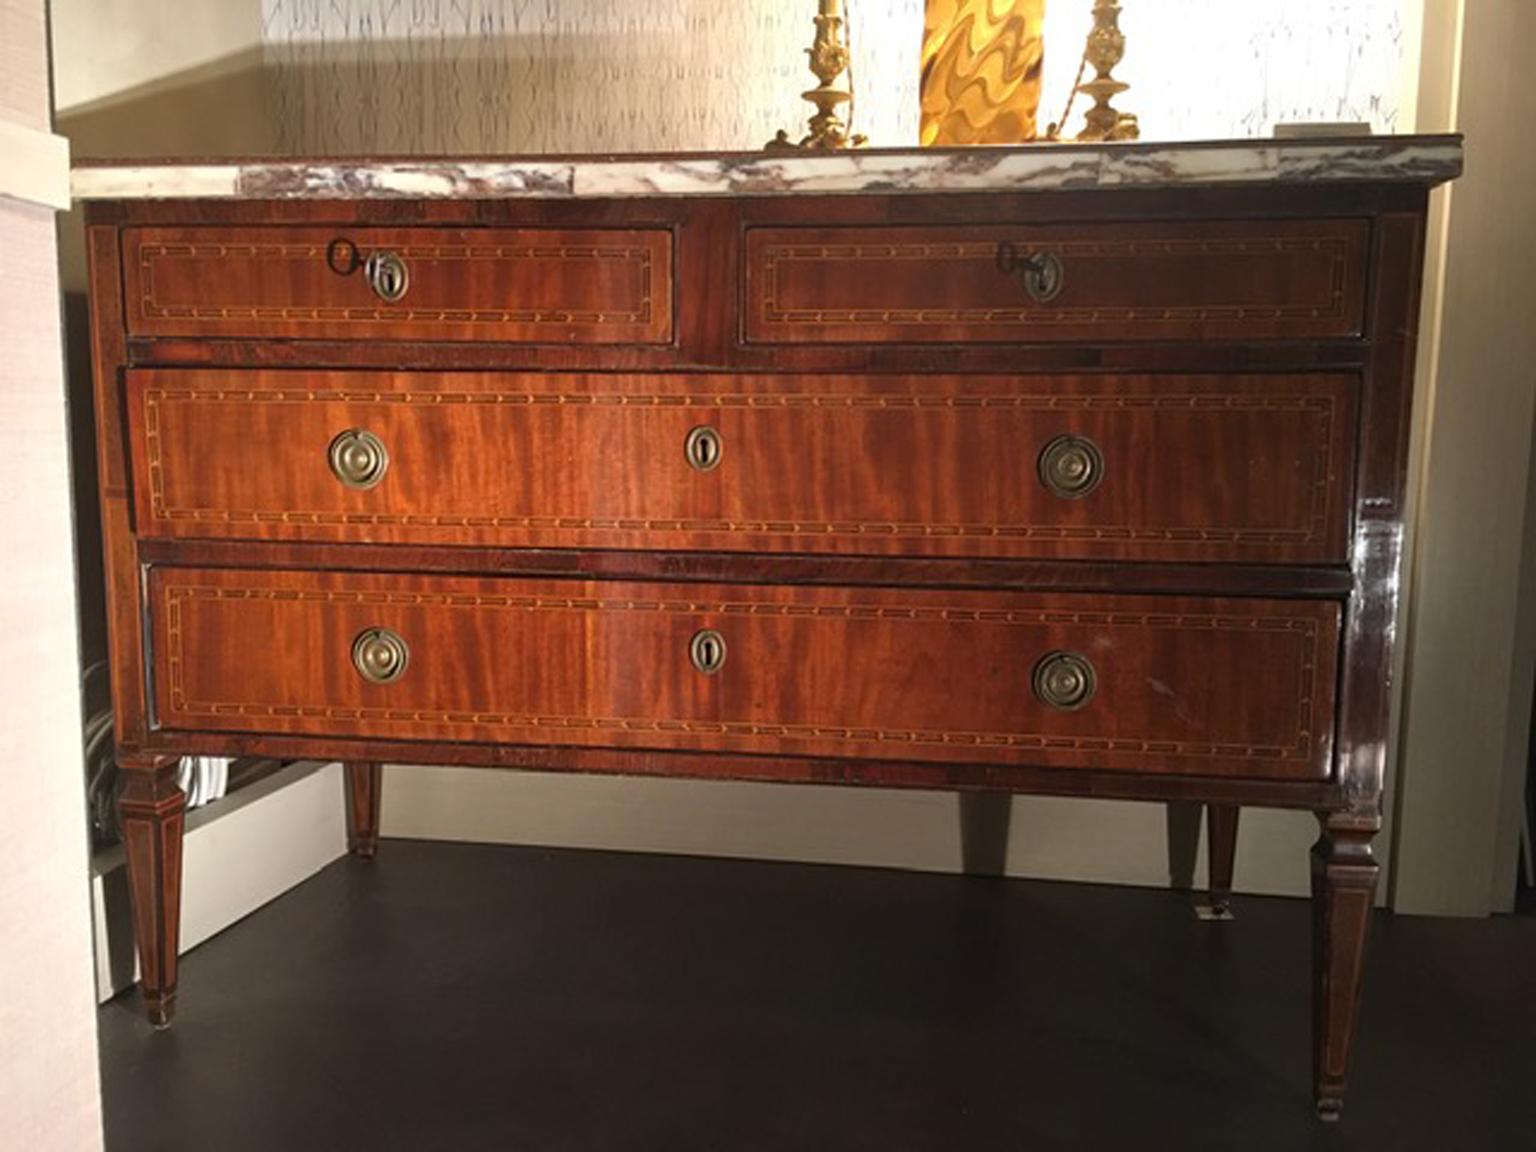 This Italian (Tuscany) chest of drawers is handmade in nutwood, pear wood and olivewood. The top is in a wonderful piece of Calacatta Violet marble with thin prophiles in imperial red porphyry. Elegant and fine inlays on the front drawers and the